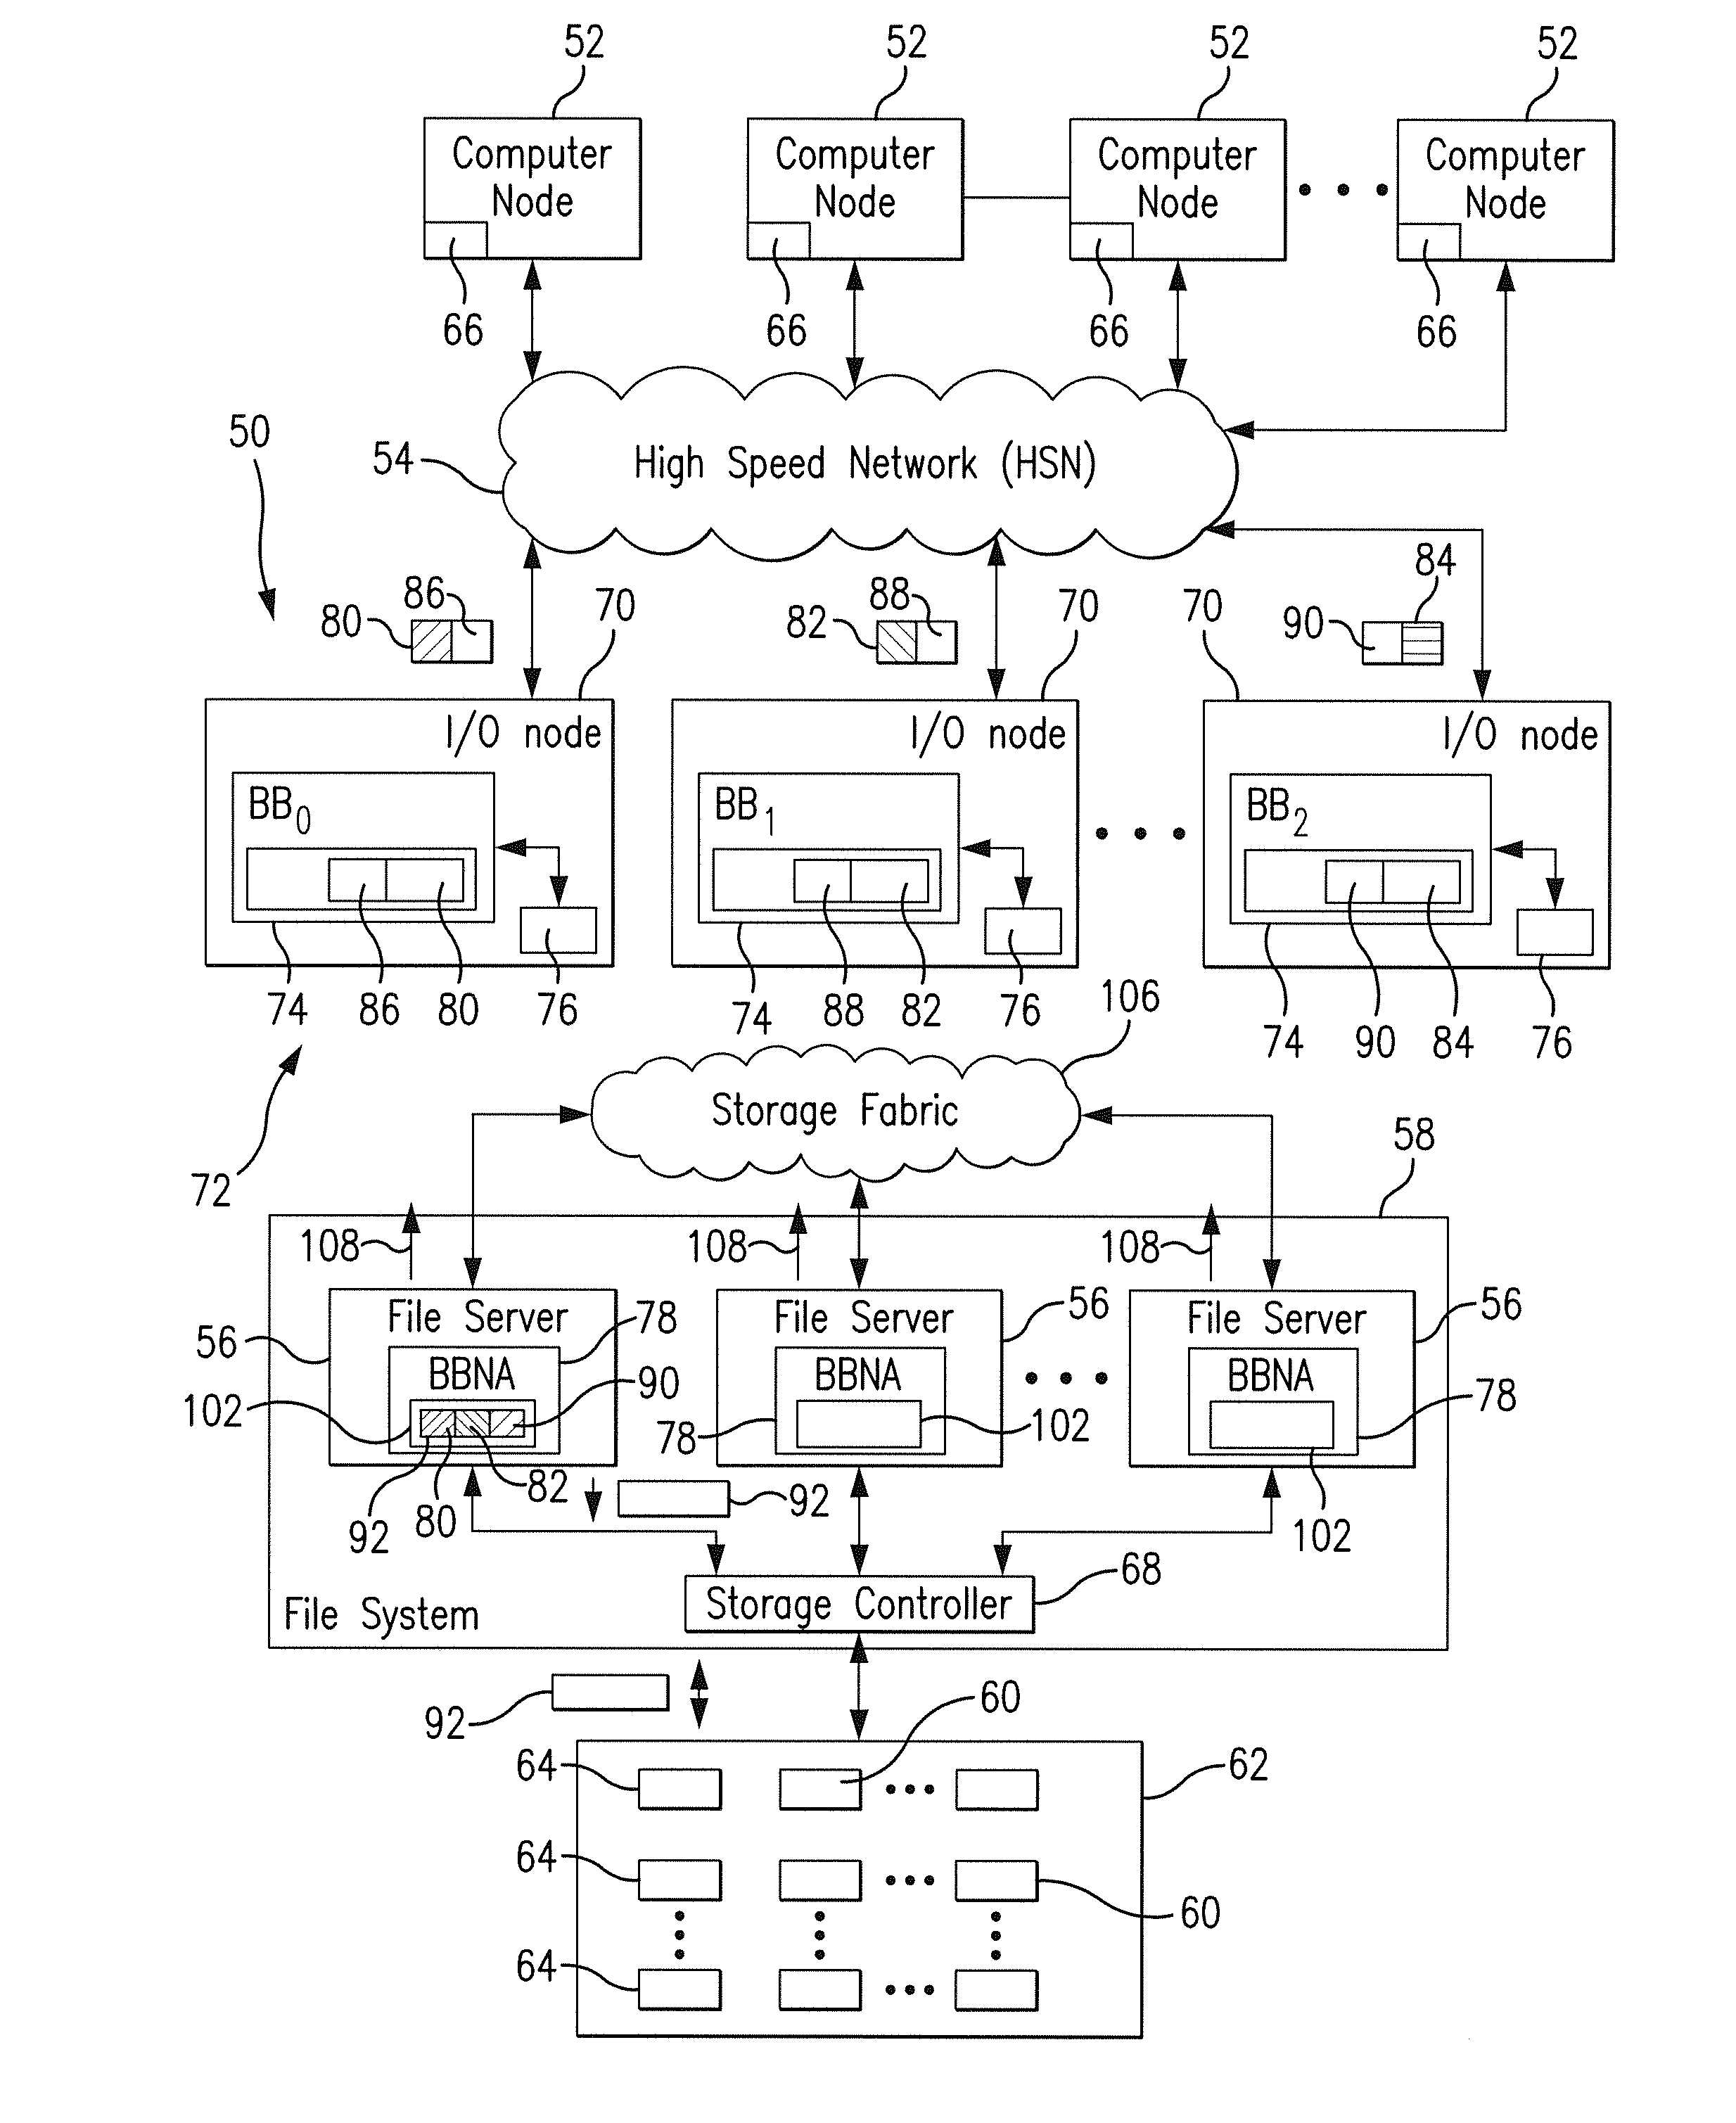 Method and system for data transfer between compute clusters and file system